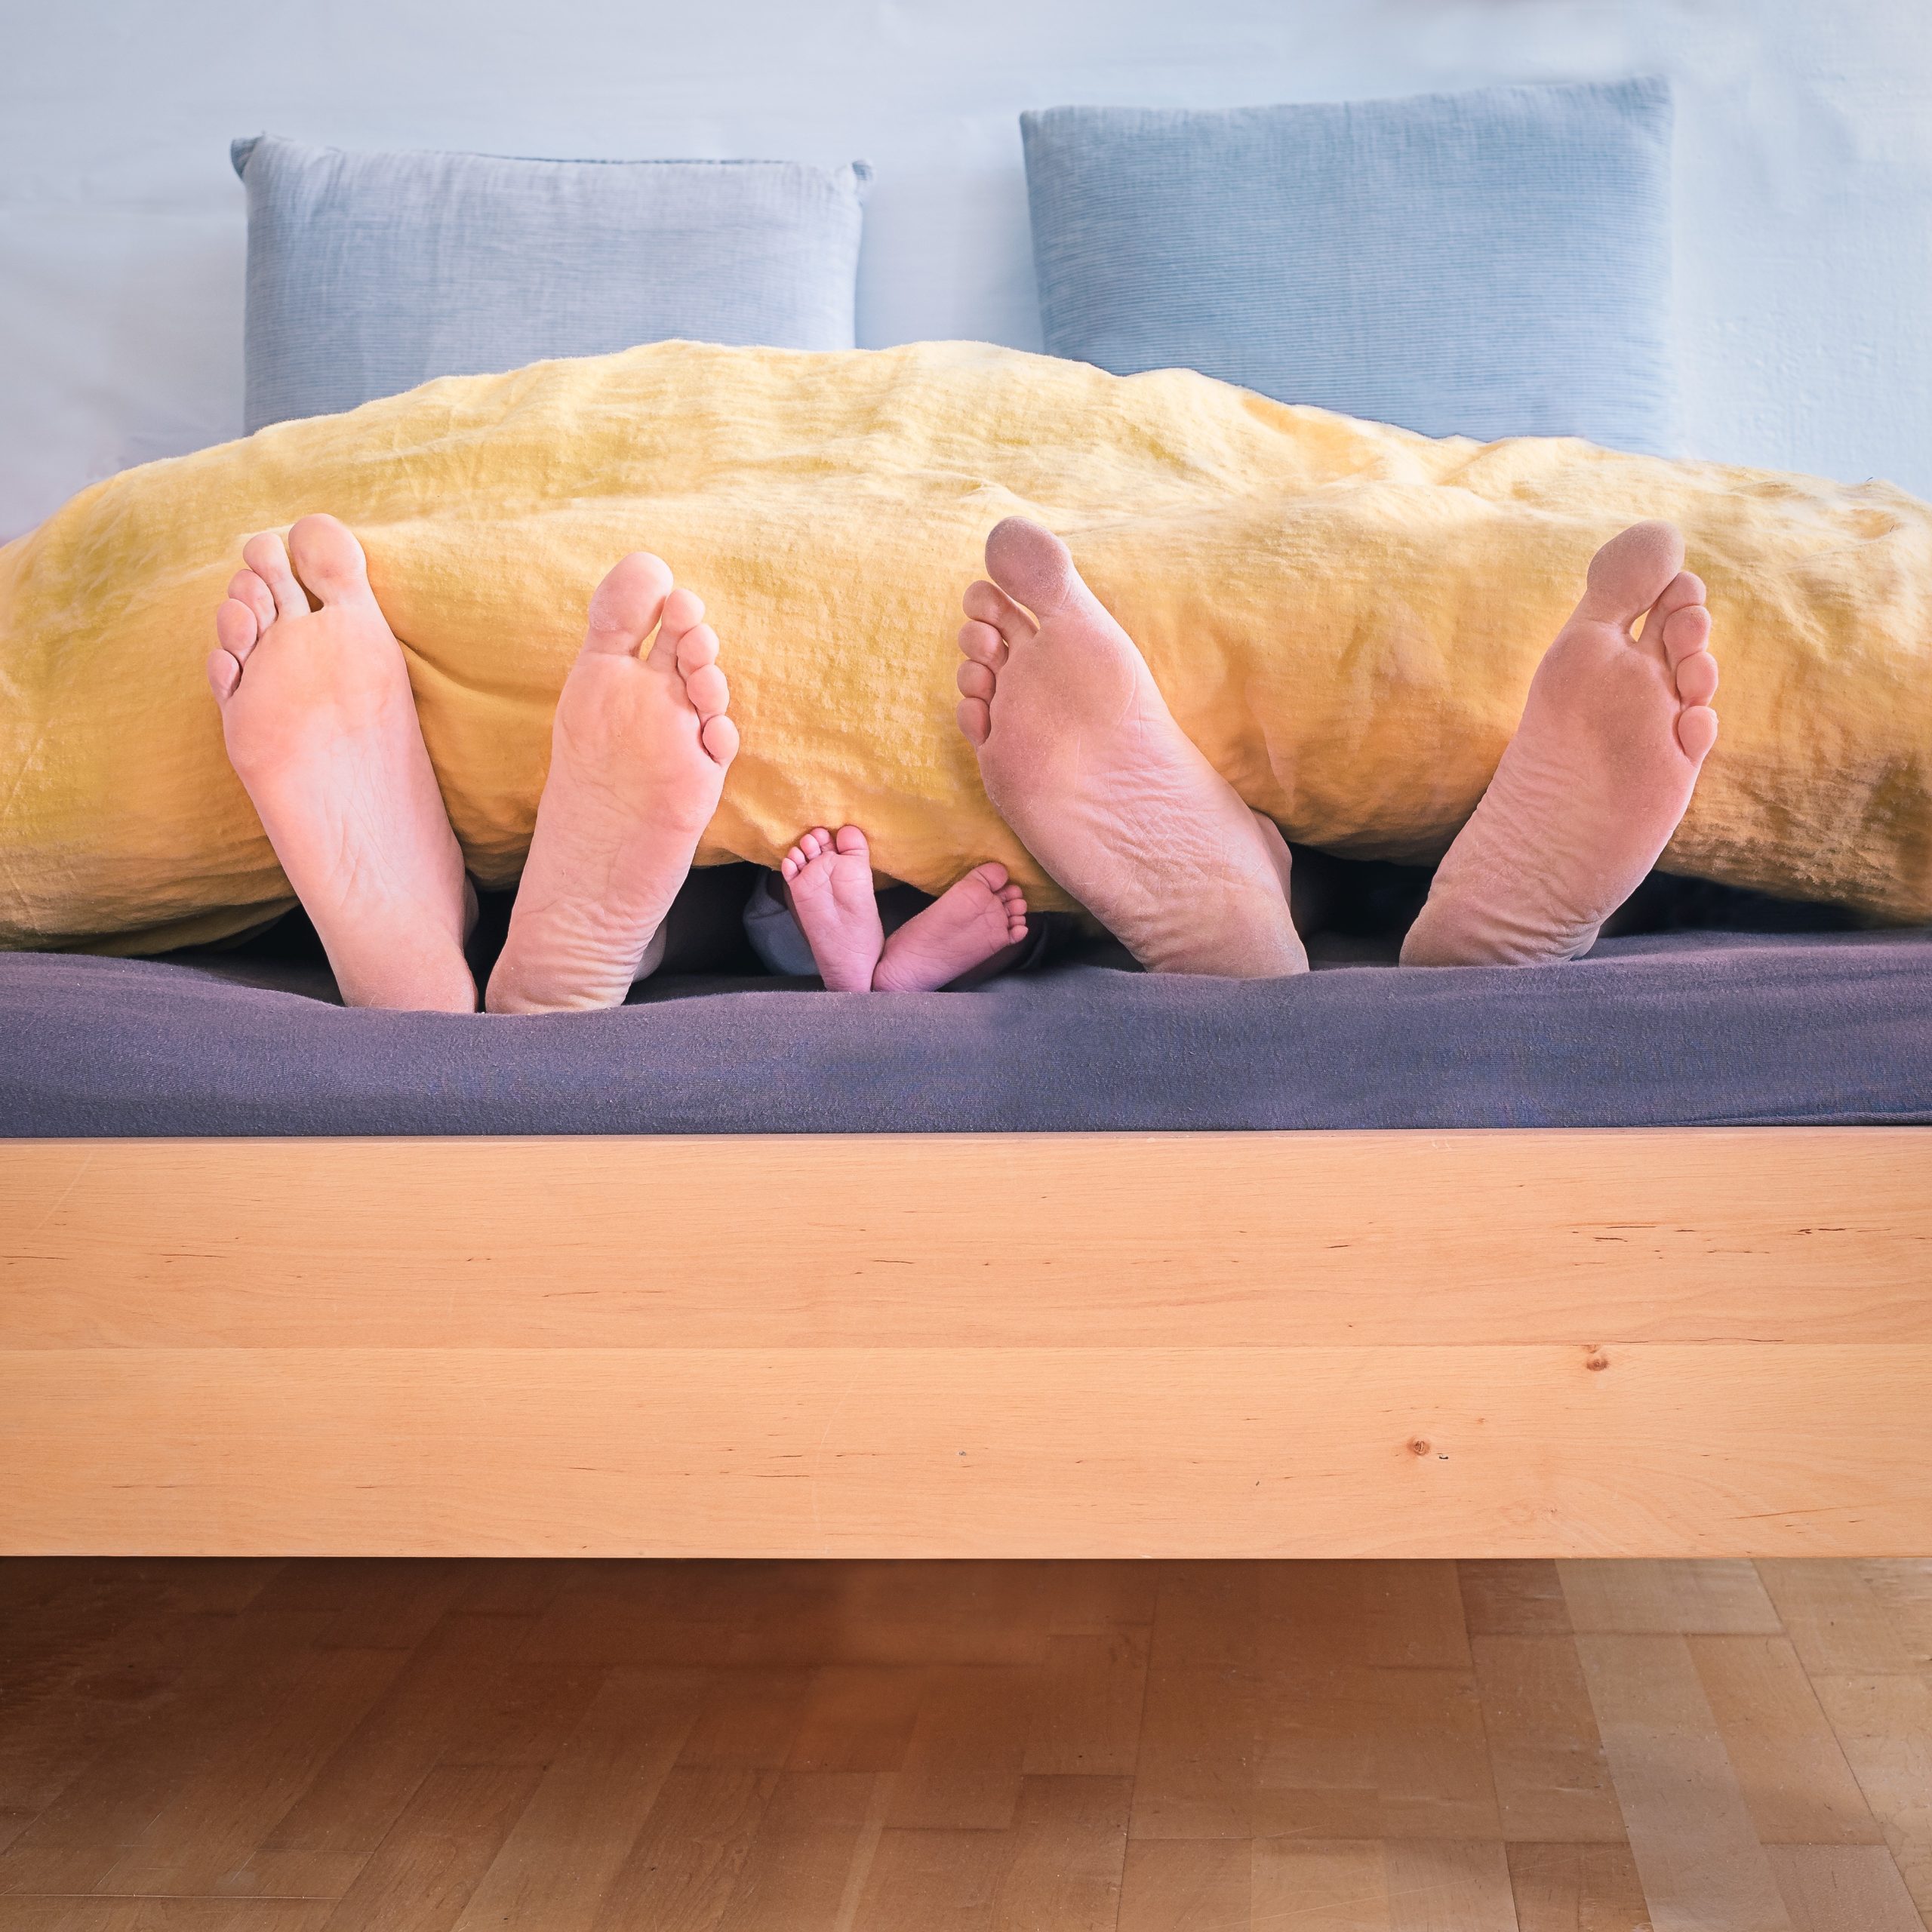 Is co sleeping right for you?